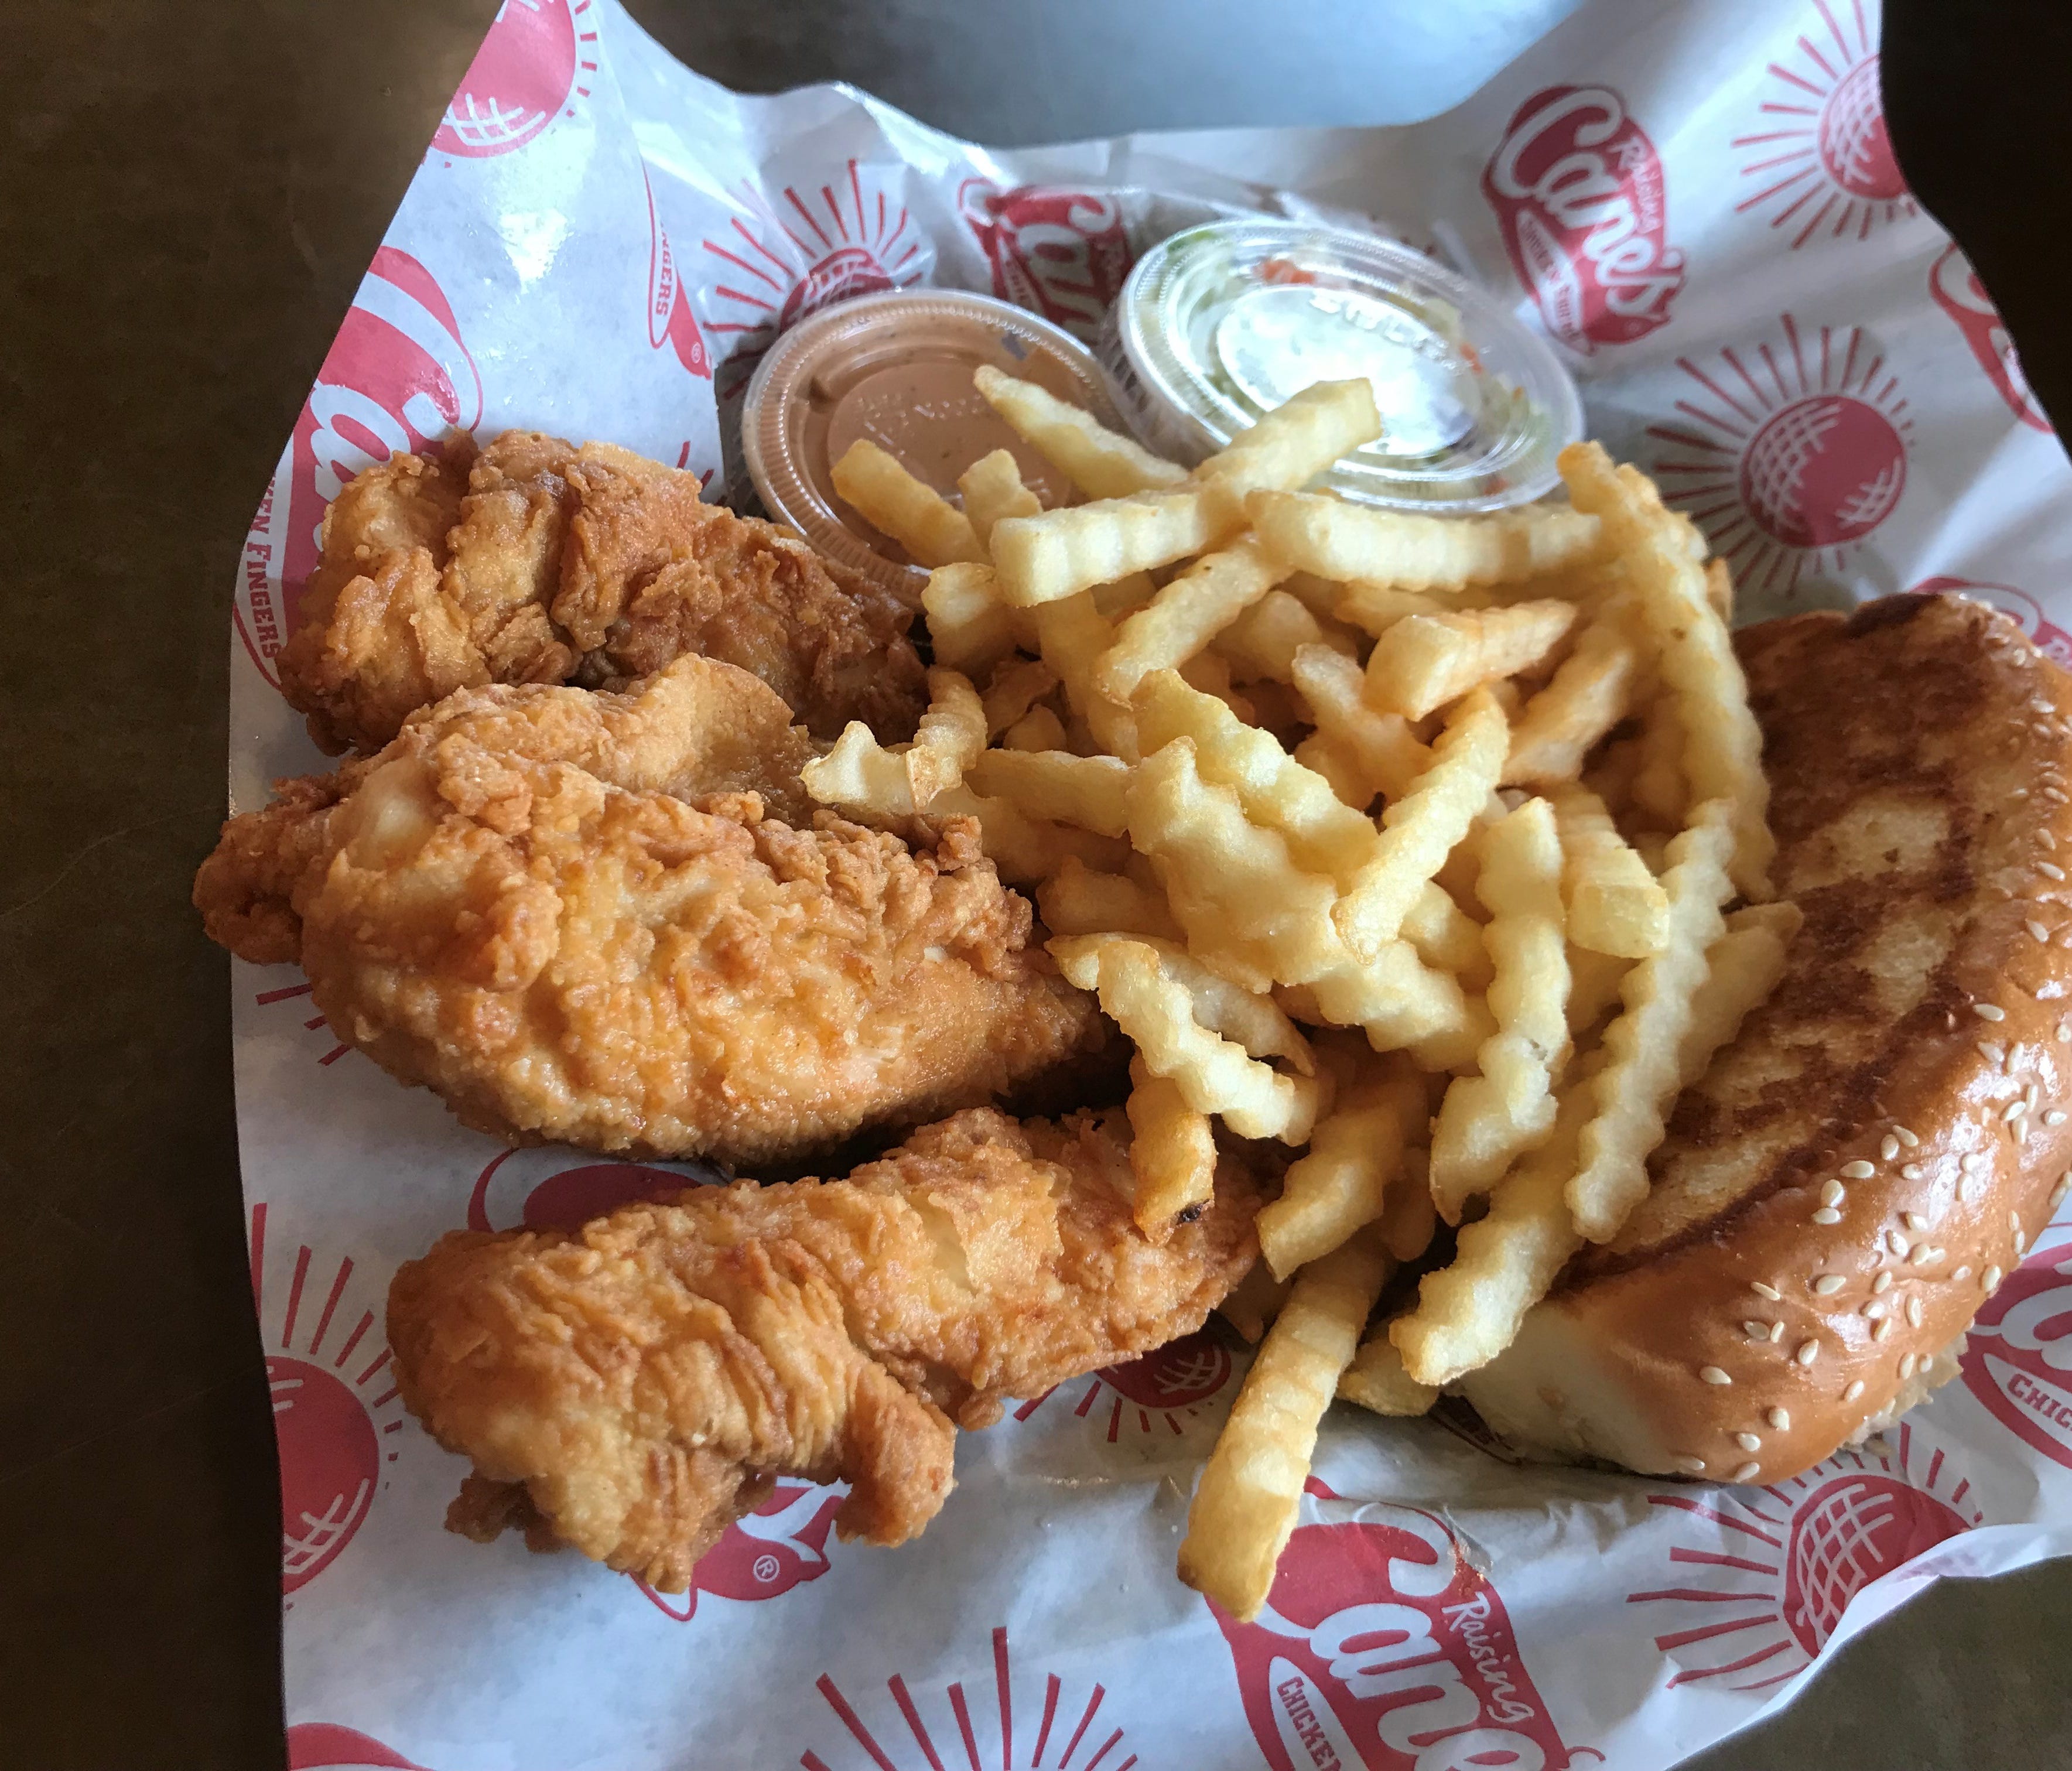 Chicken fingers are the main event – and the only event – at Raising Cane's, a chain built entirely around this one humble dish. The most popular entrée, the Box Combo, features four tenders with Cane's Sauce for dipping, cole slaw, crinkle-cut fries